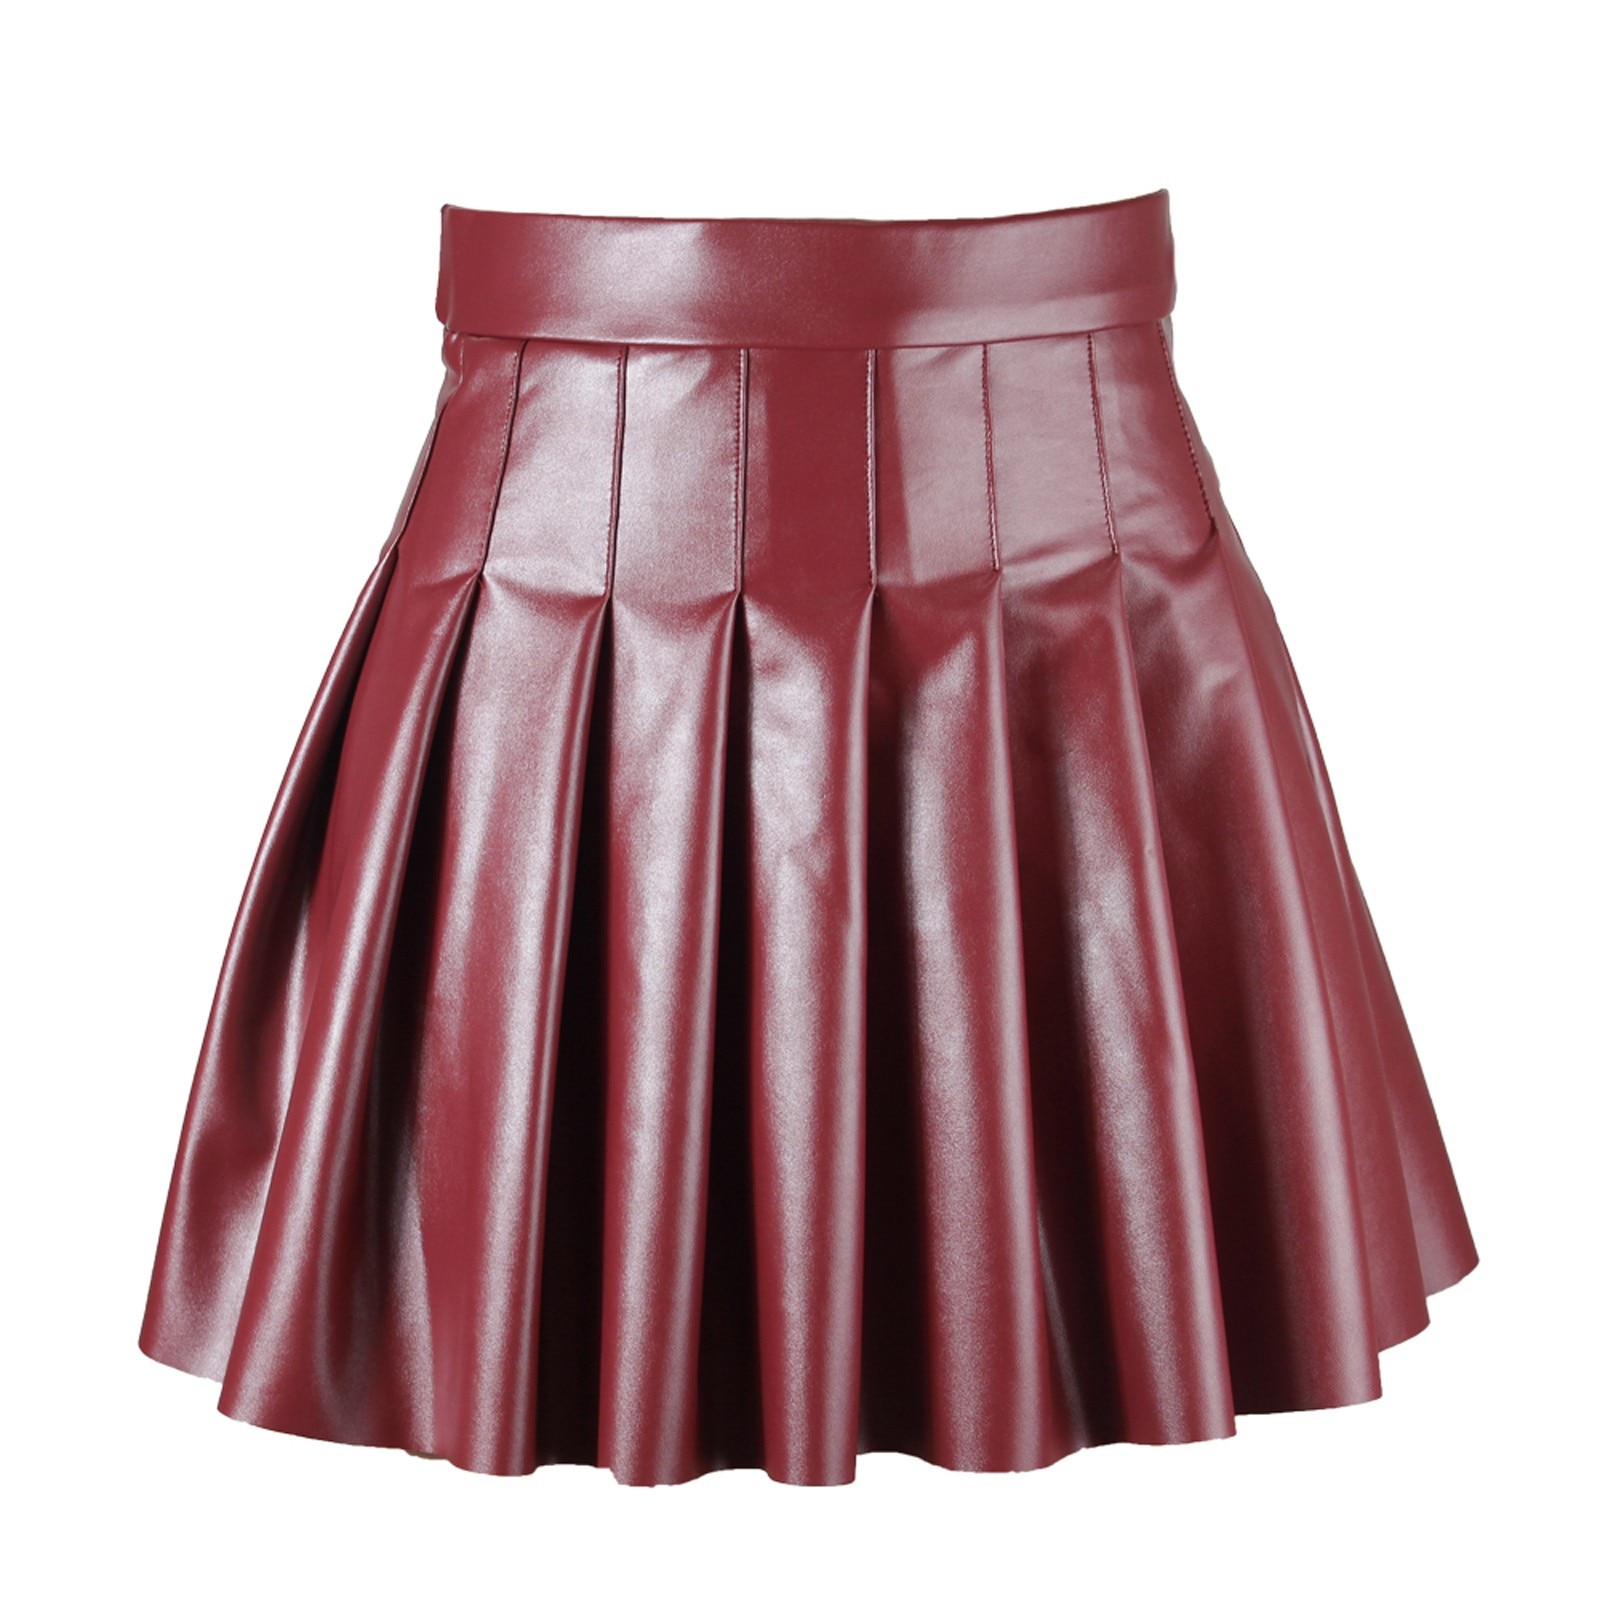 Women High Waist Pleated Skirt Spring Summer Casual Faux Leather A-line Black Leather Mini Skirts for Girls Y2k Skort Clothes